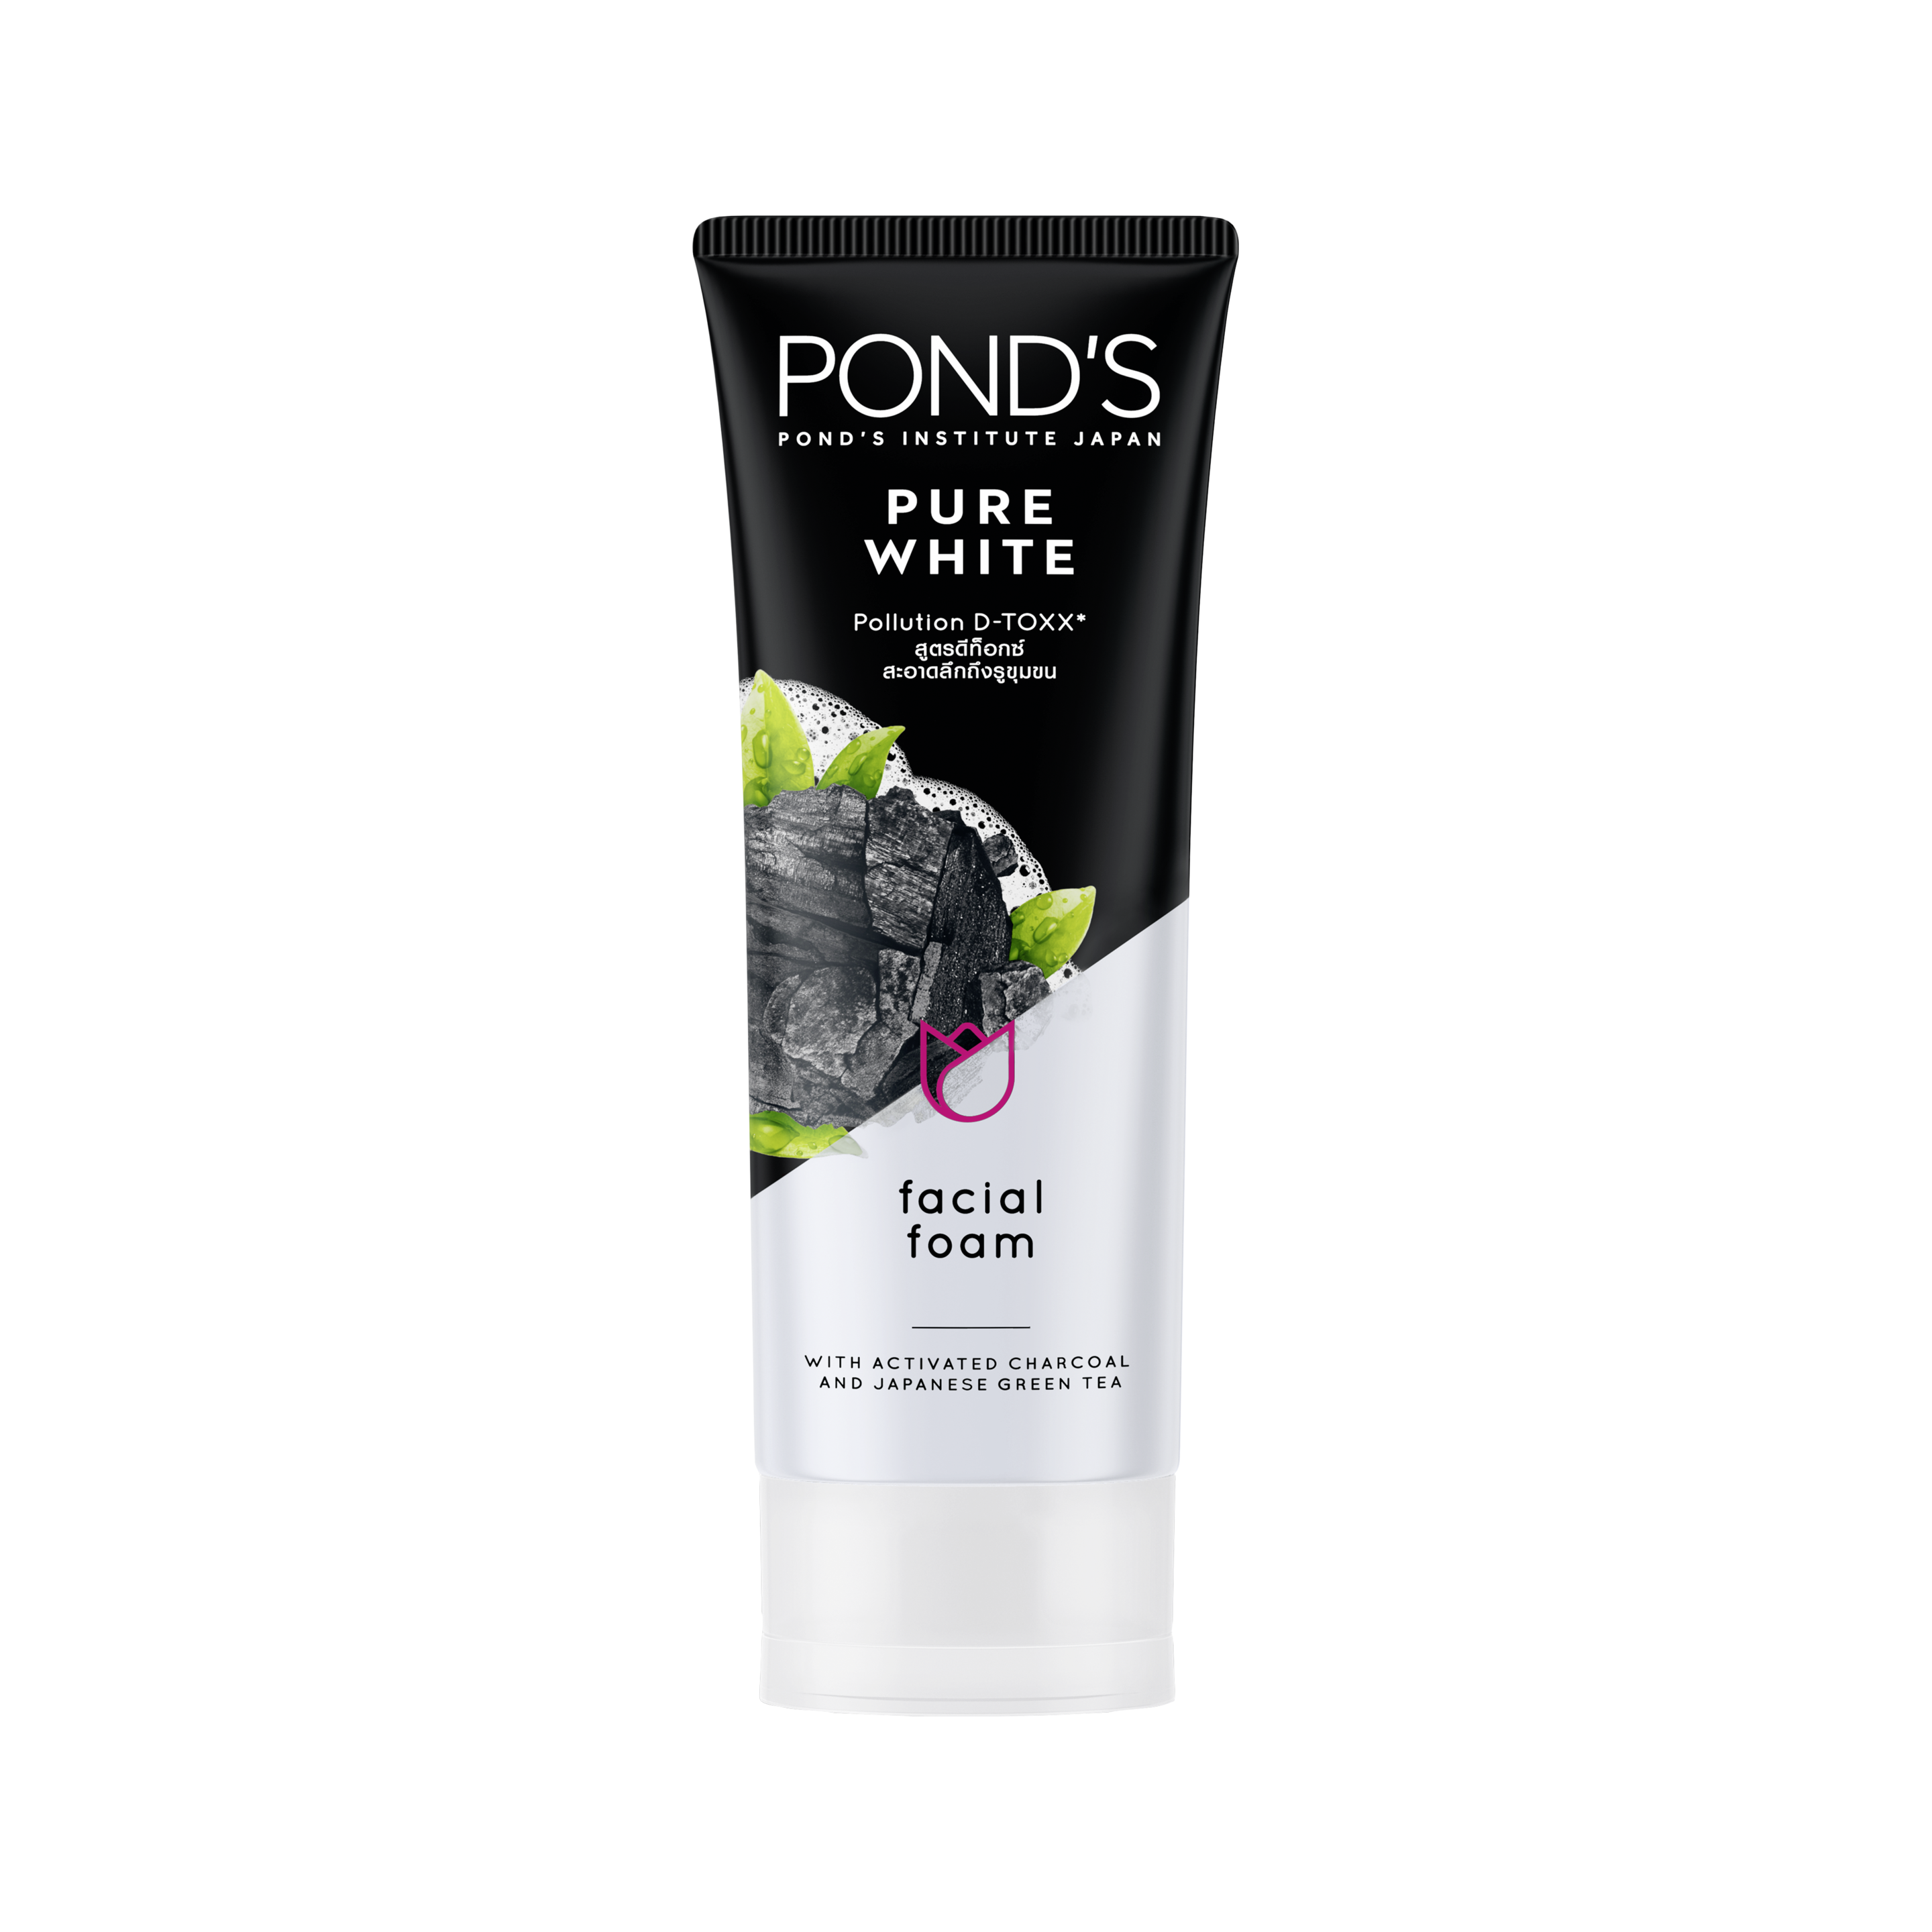 Sữa rửa mặt pond's pure white Pollution Out + Purity